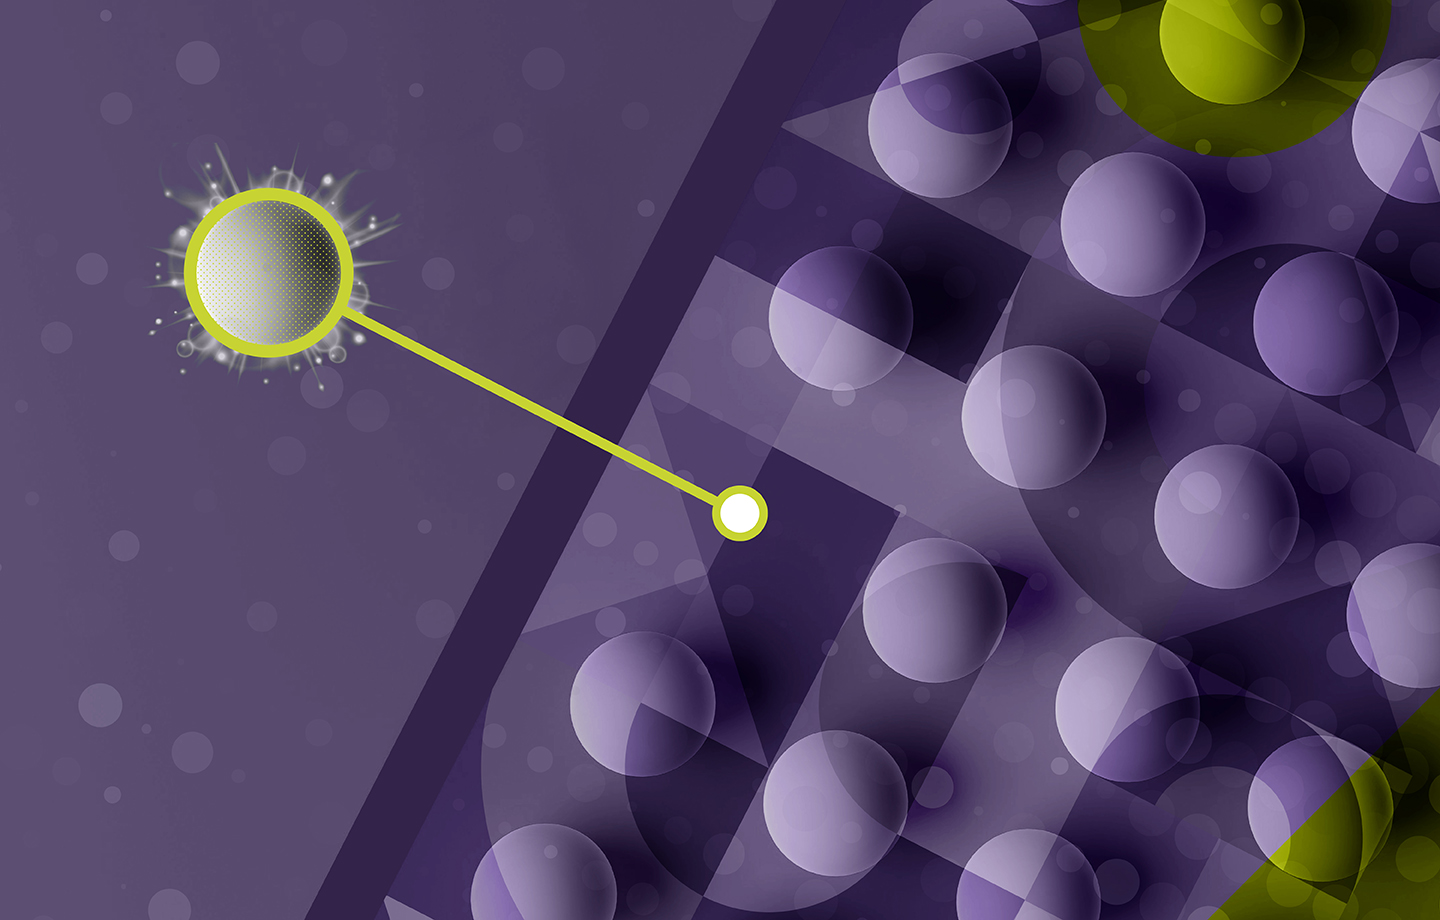 A gray sphere standing out from a crowd of other gray spheres on a purple and green background